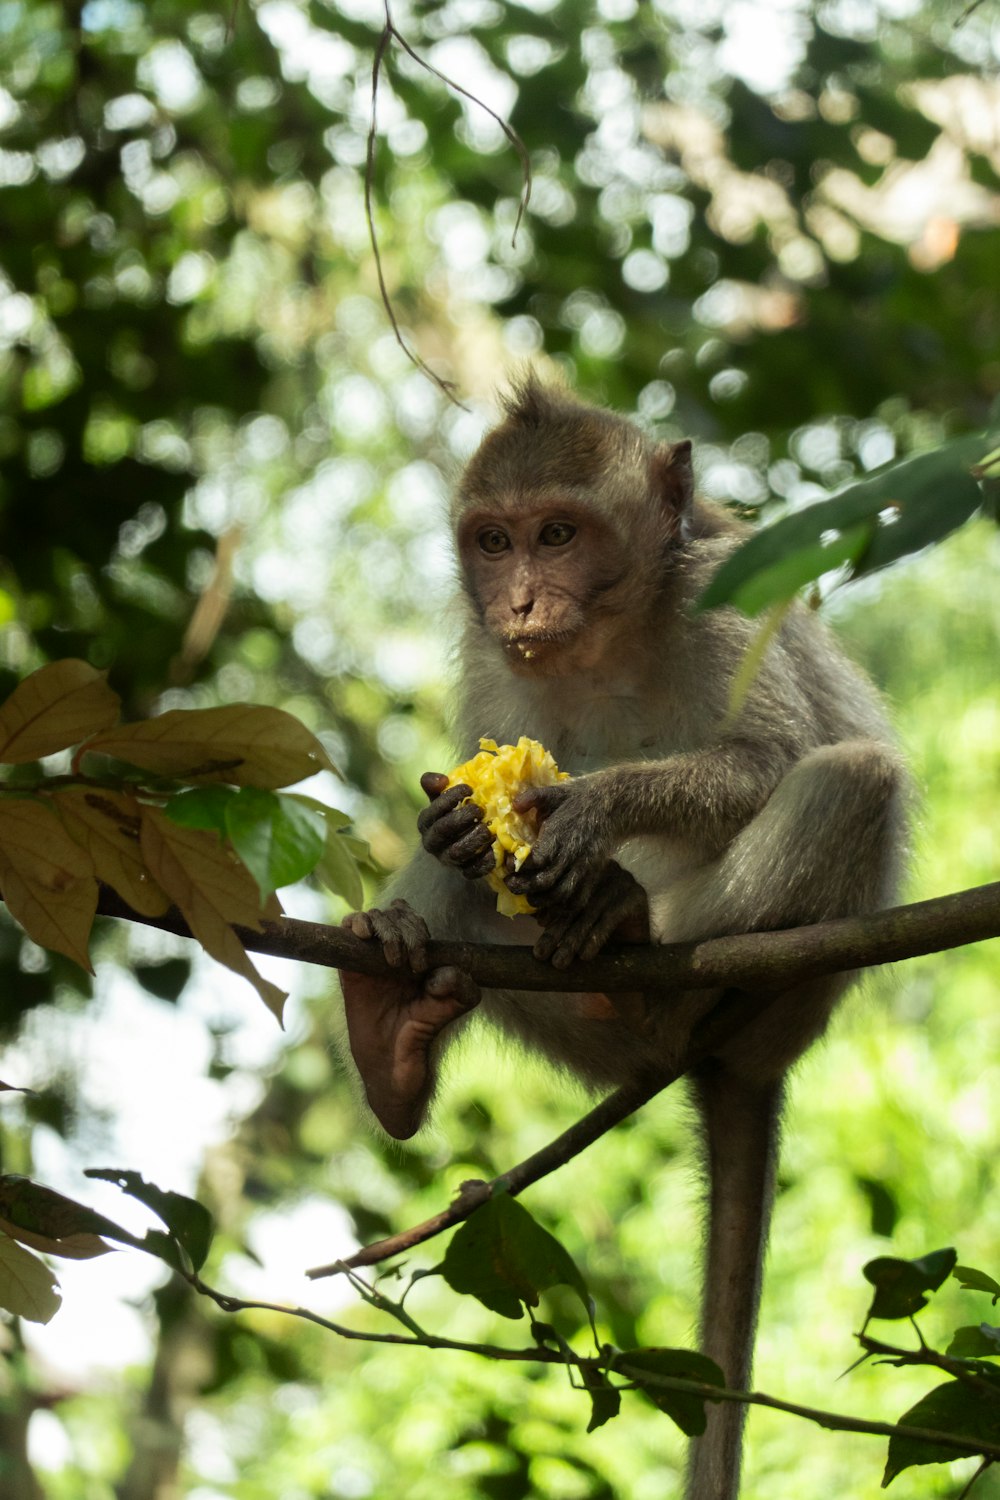 a monkey sitting on a tree branch eating a banana